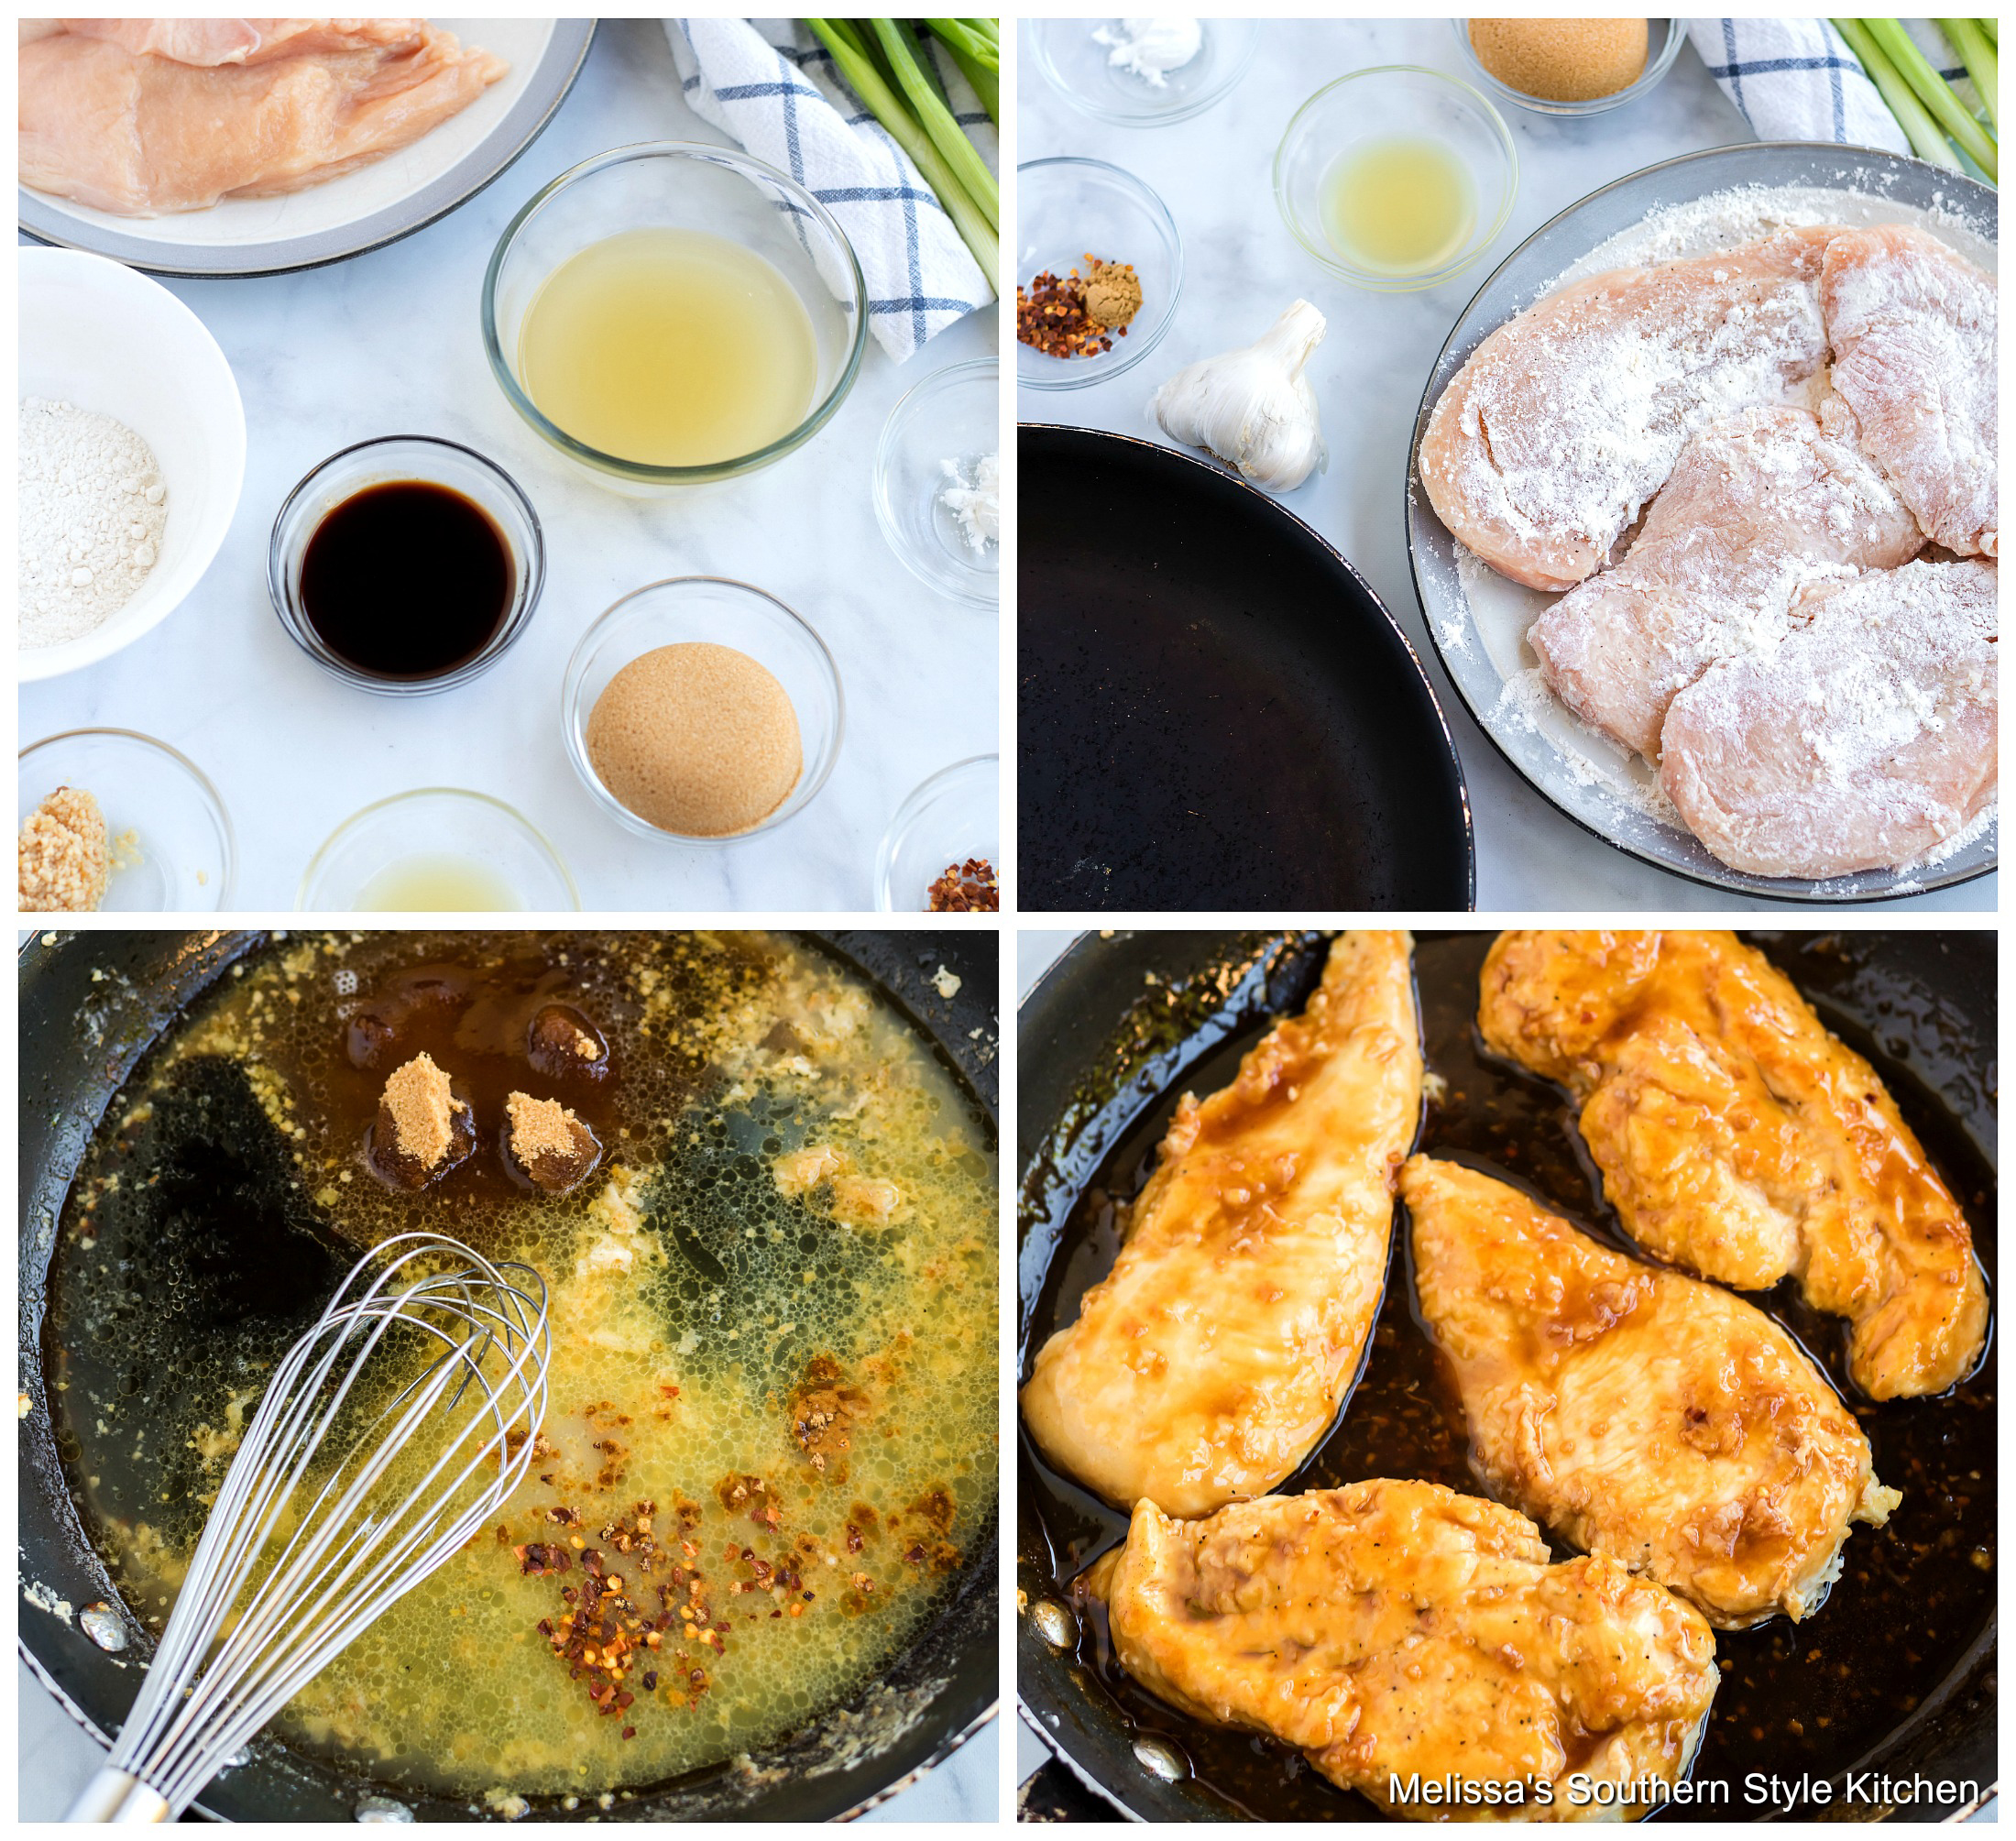 Step-by-step images and ingredients for Garlic Brown Sugar Chicken